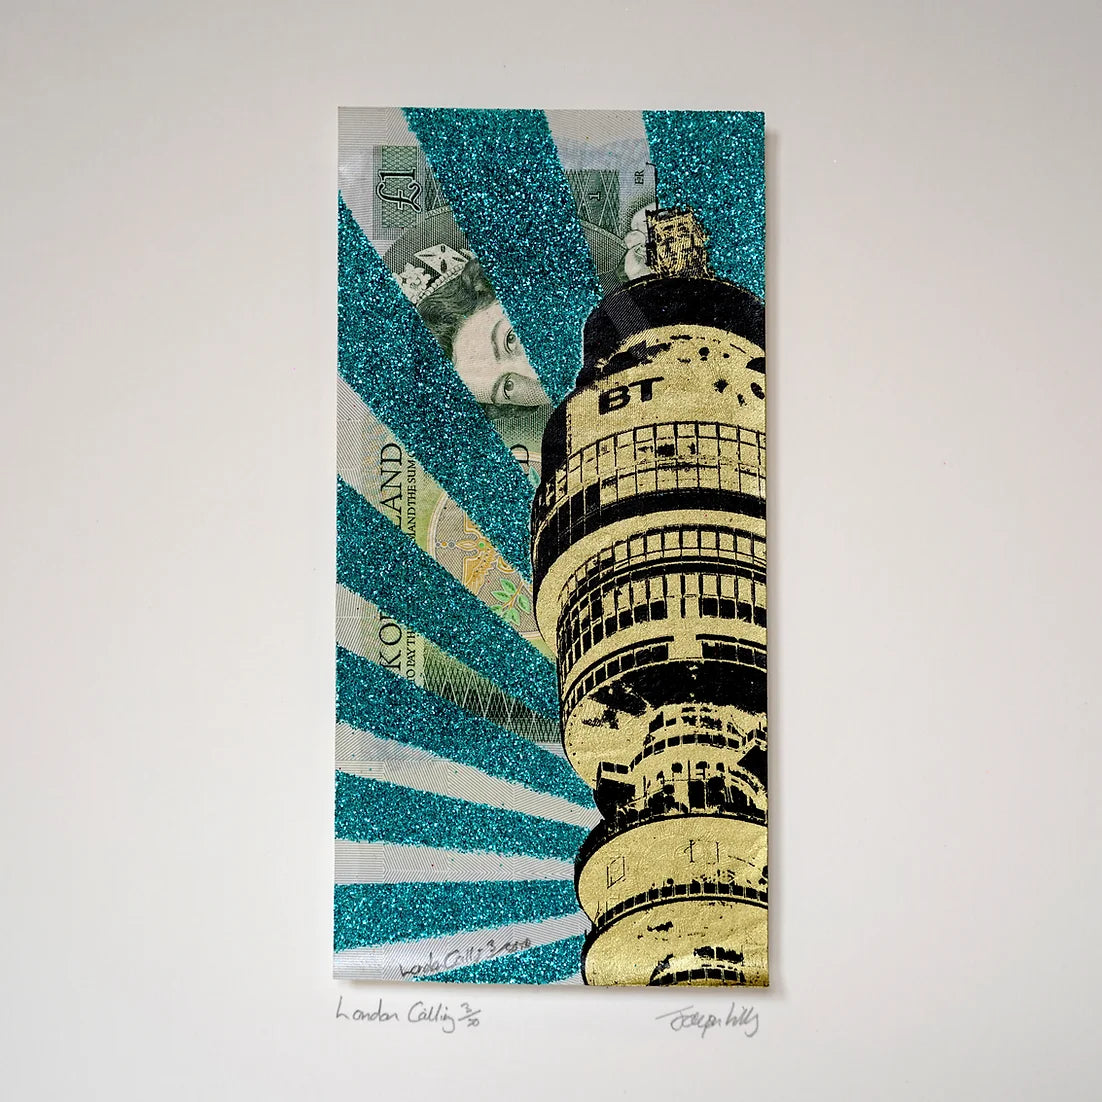 'London Calling' screen Print on One pound note with turquoise glitter and gold ink by Jayson Lilley